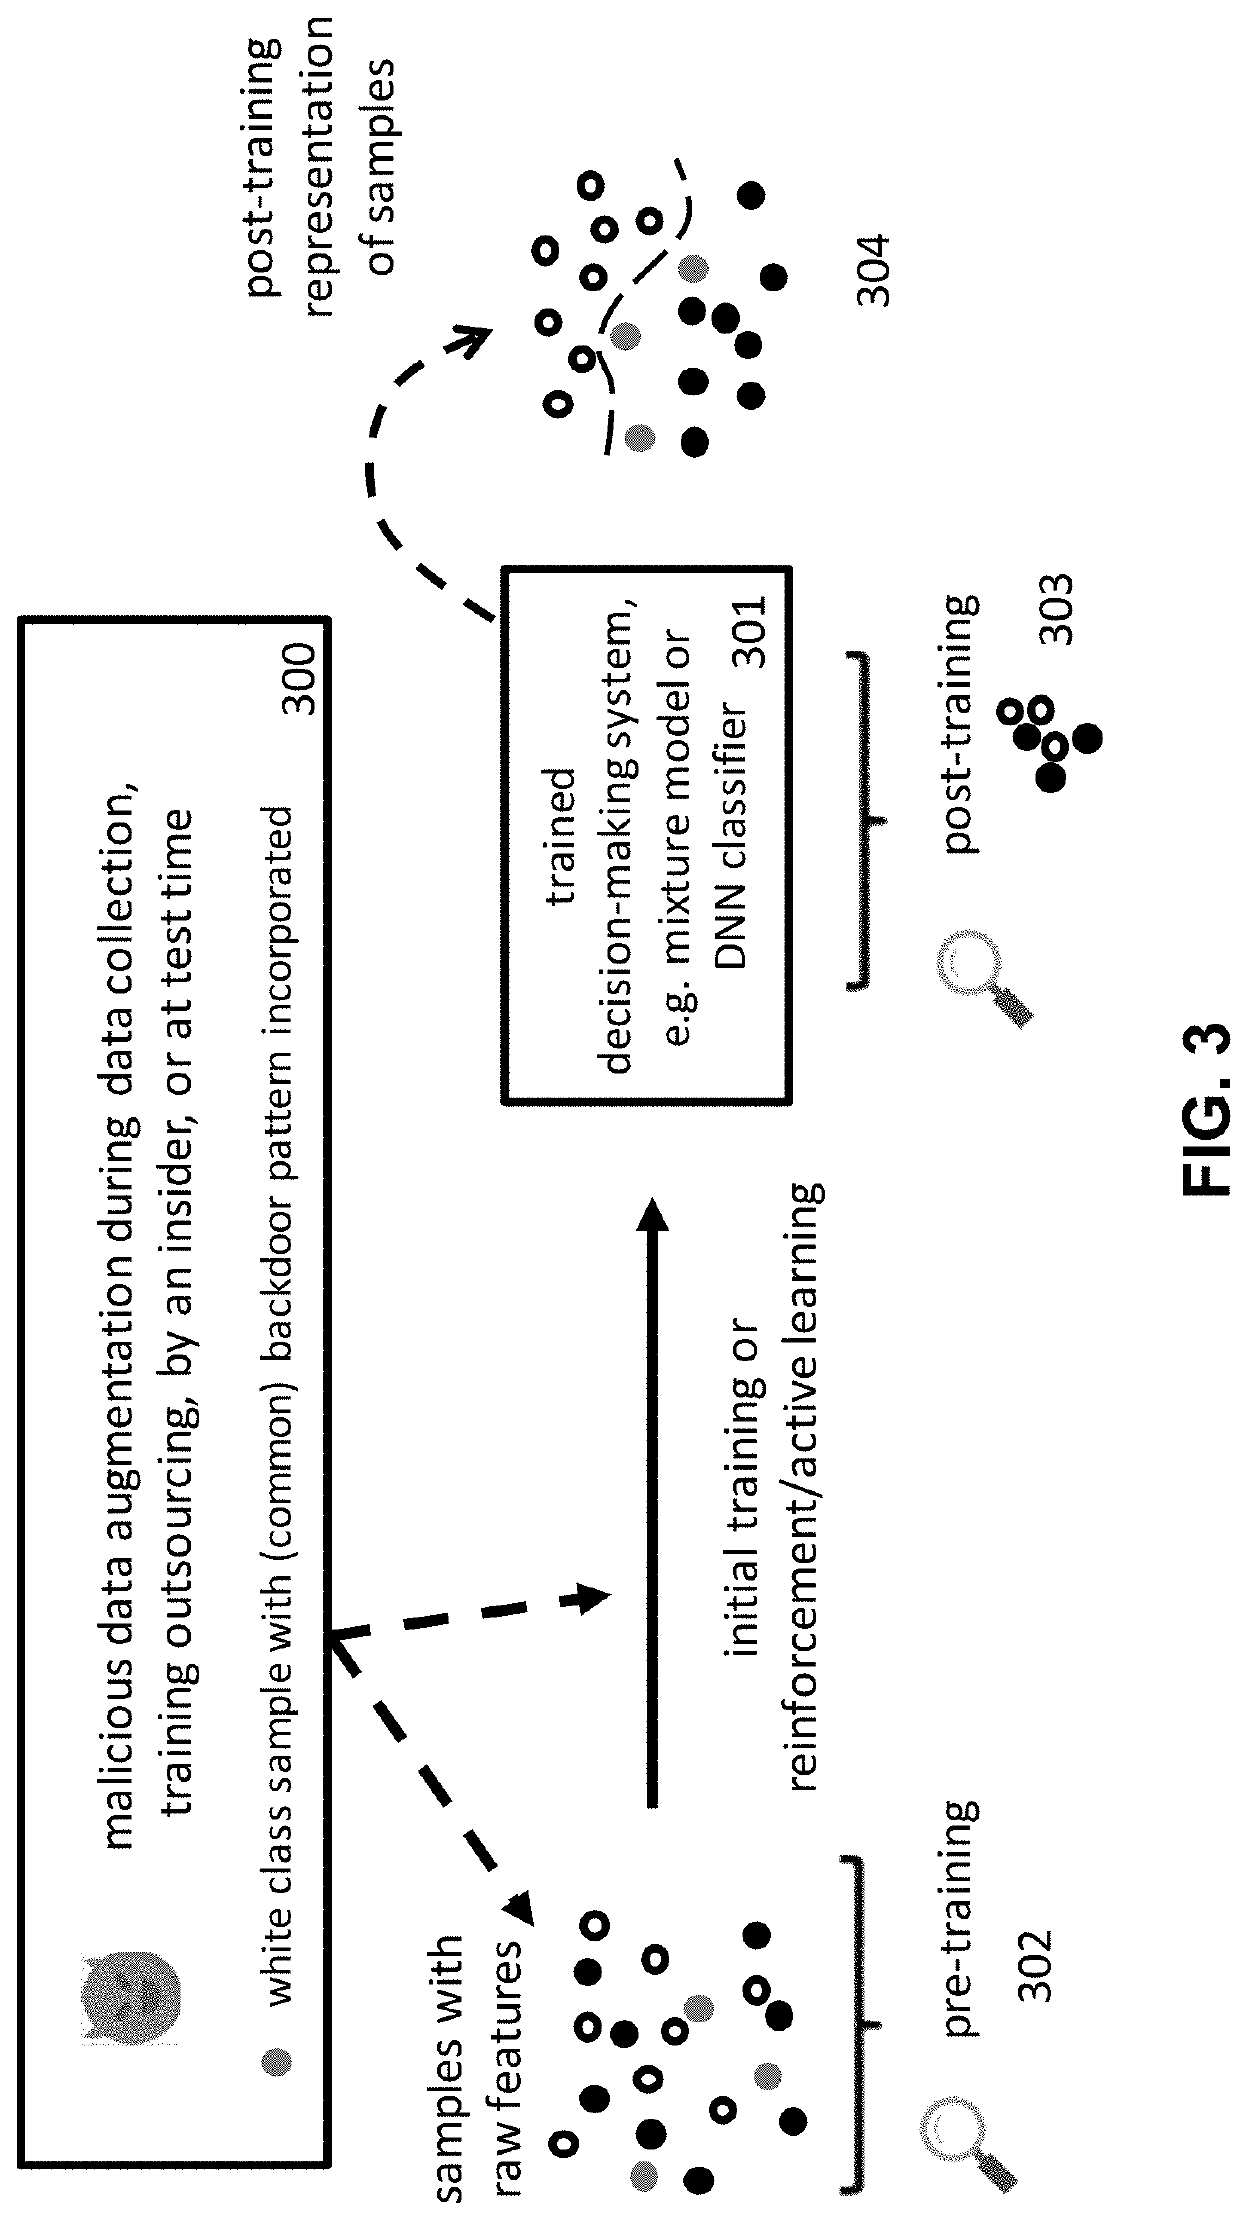 Post-Training Detection and Identification of Human-Imperceptible Backdoor-Poisoning Attacks